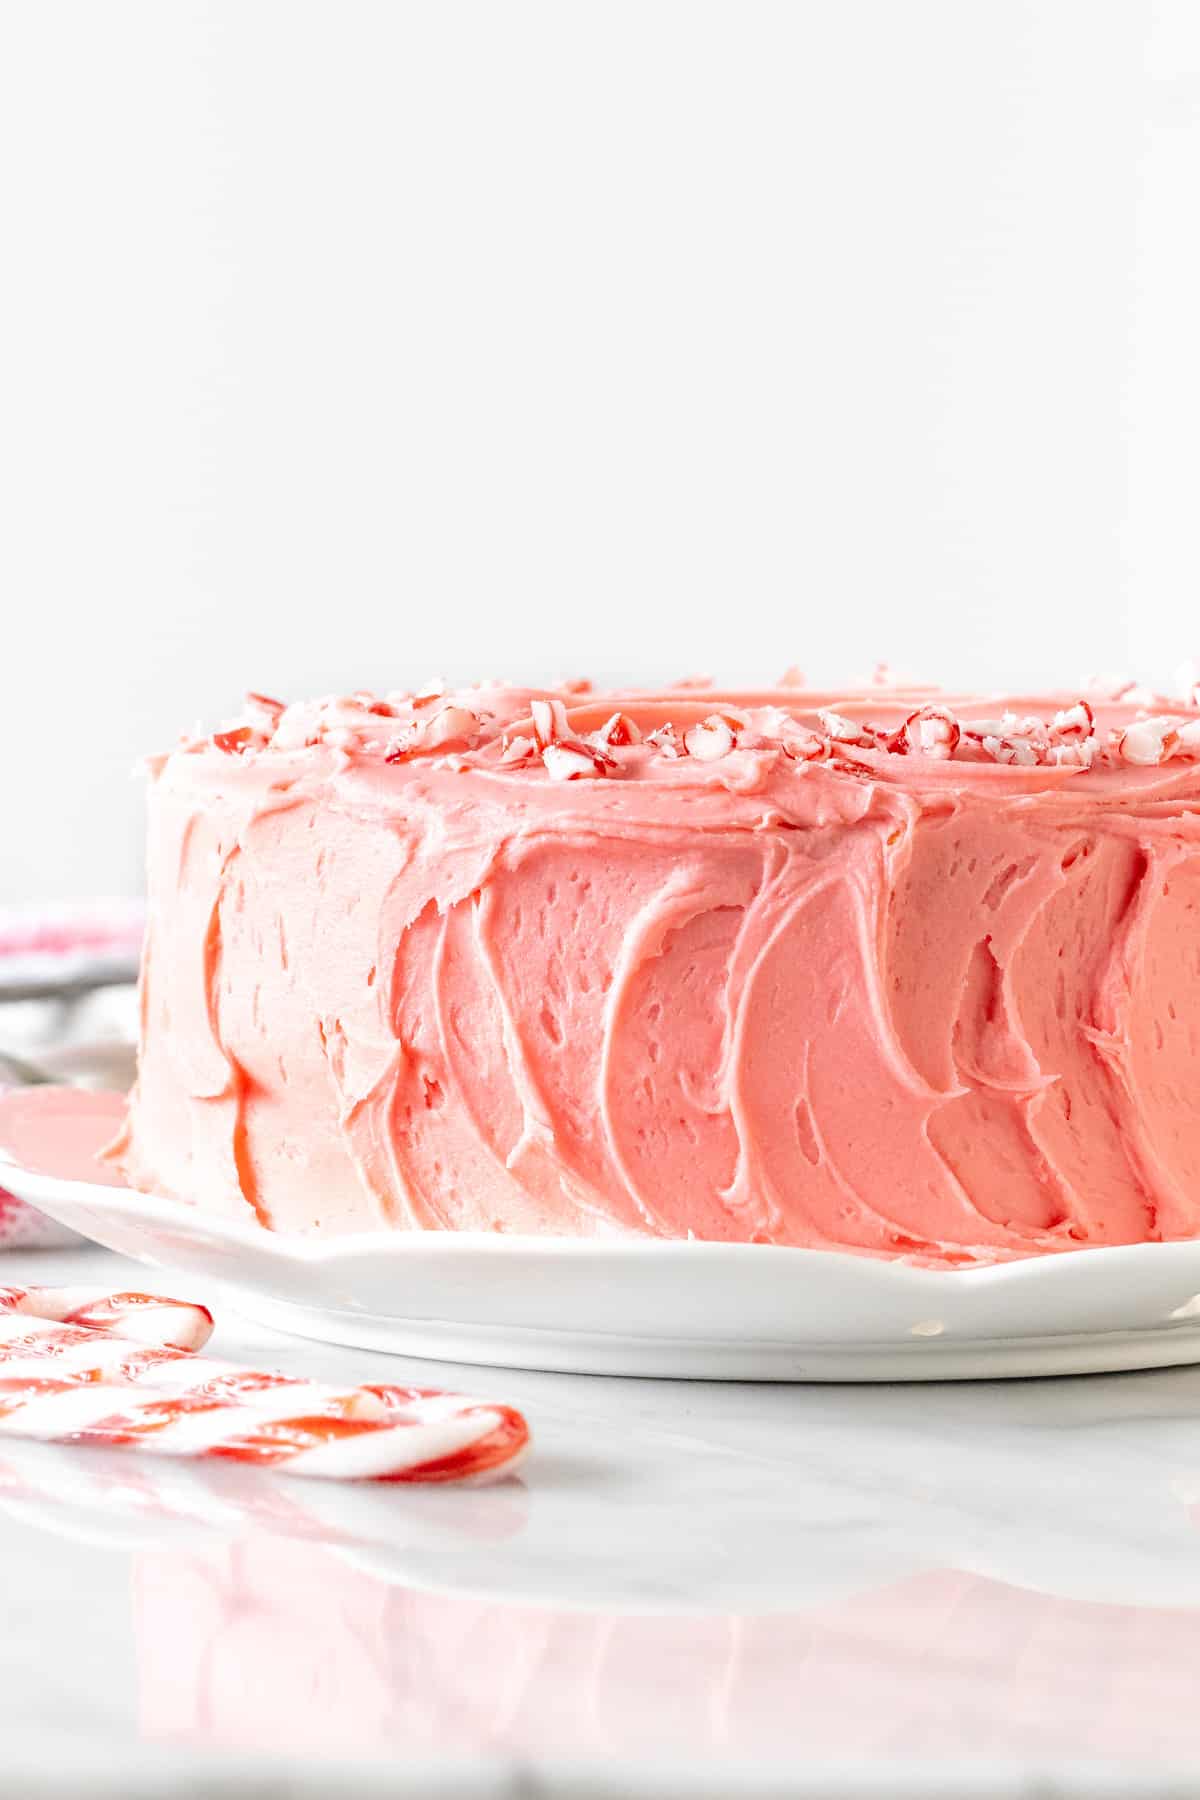 Candy cane cake with pink peppermint frosting